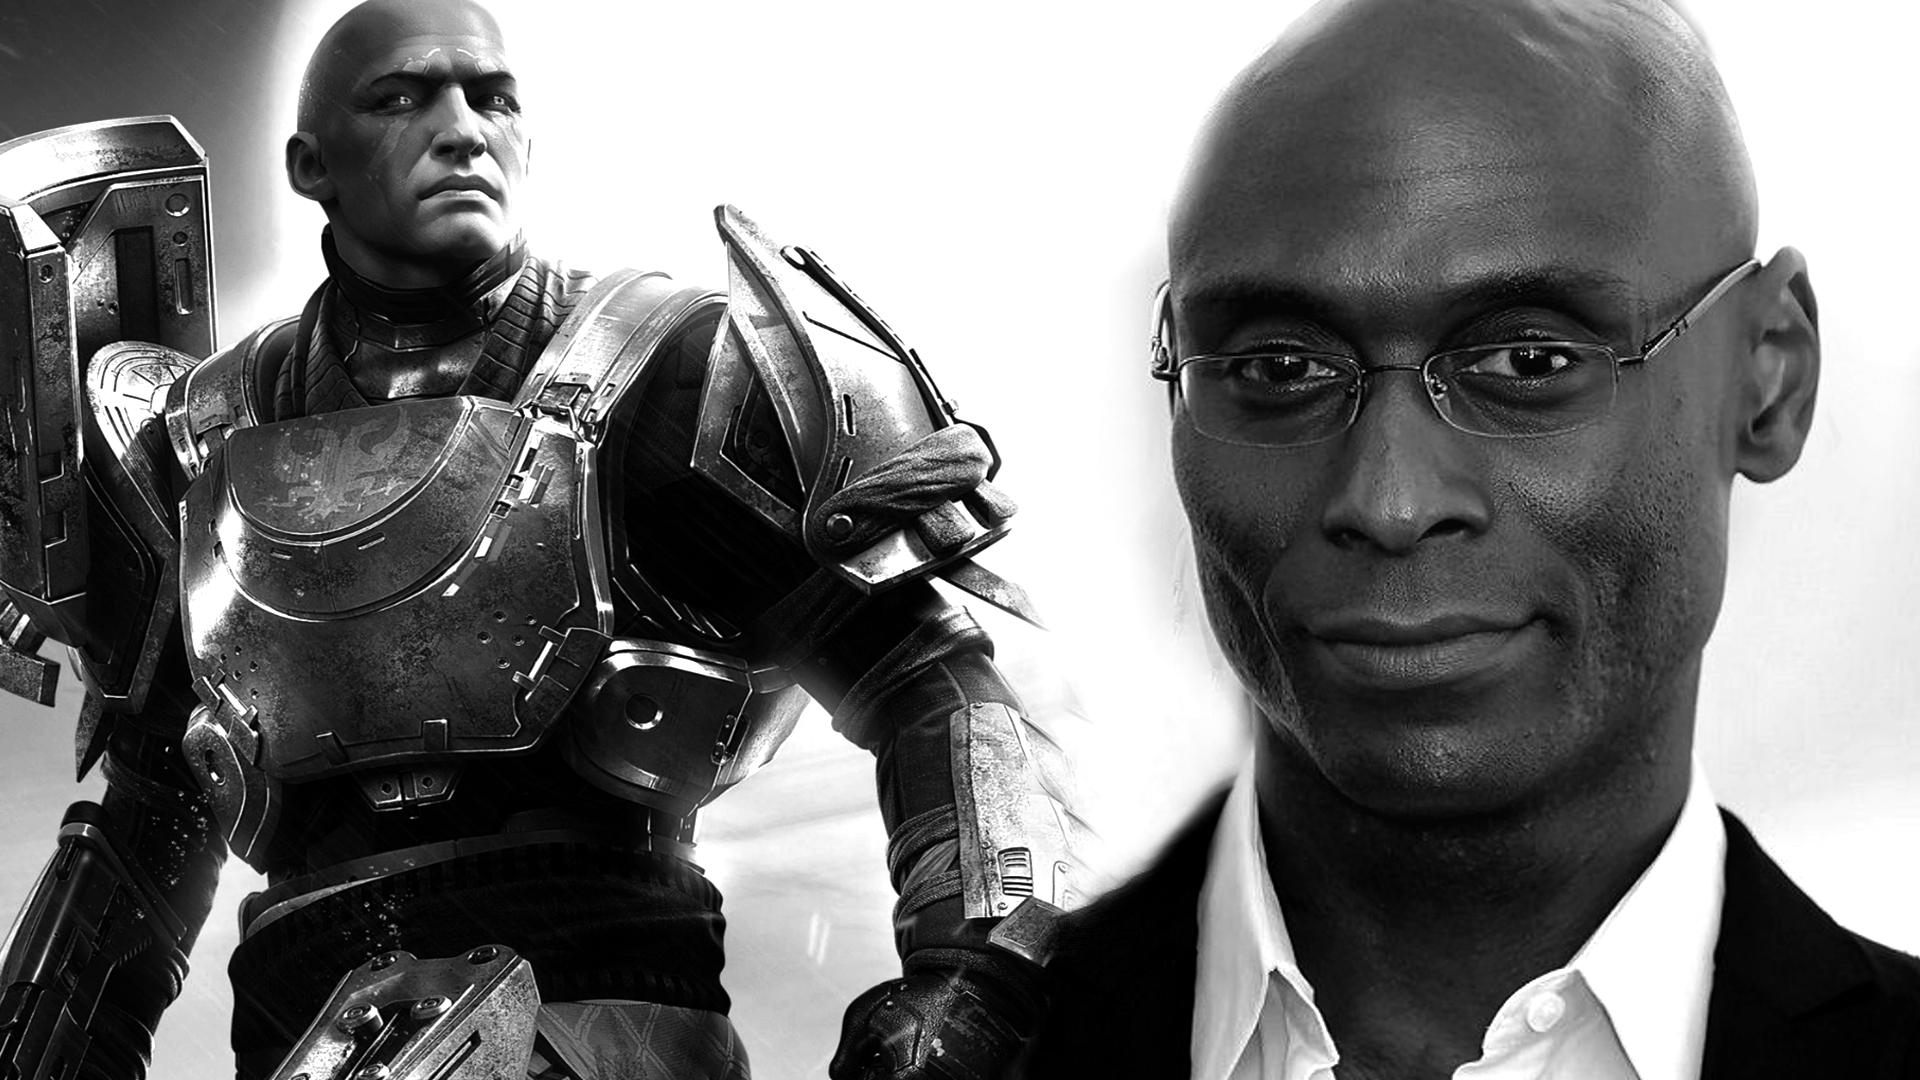 Destiny 2: Zavala Voice Actor Has Died - A Legend Gone Too Soon